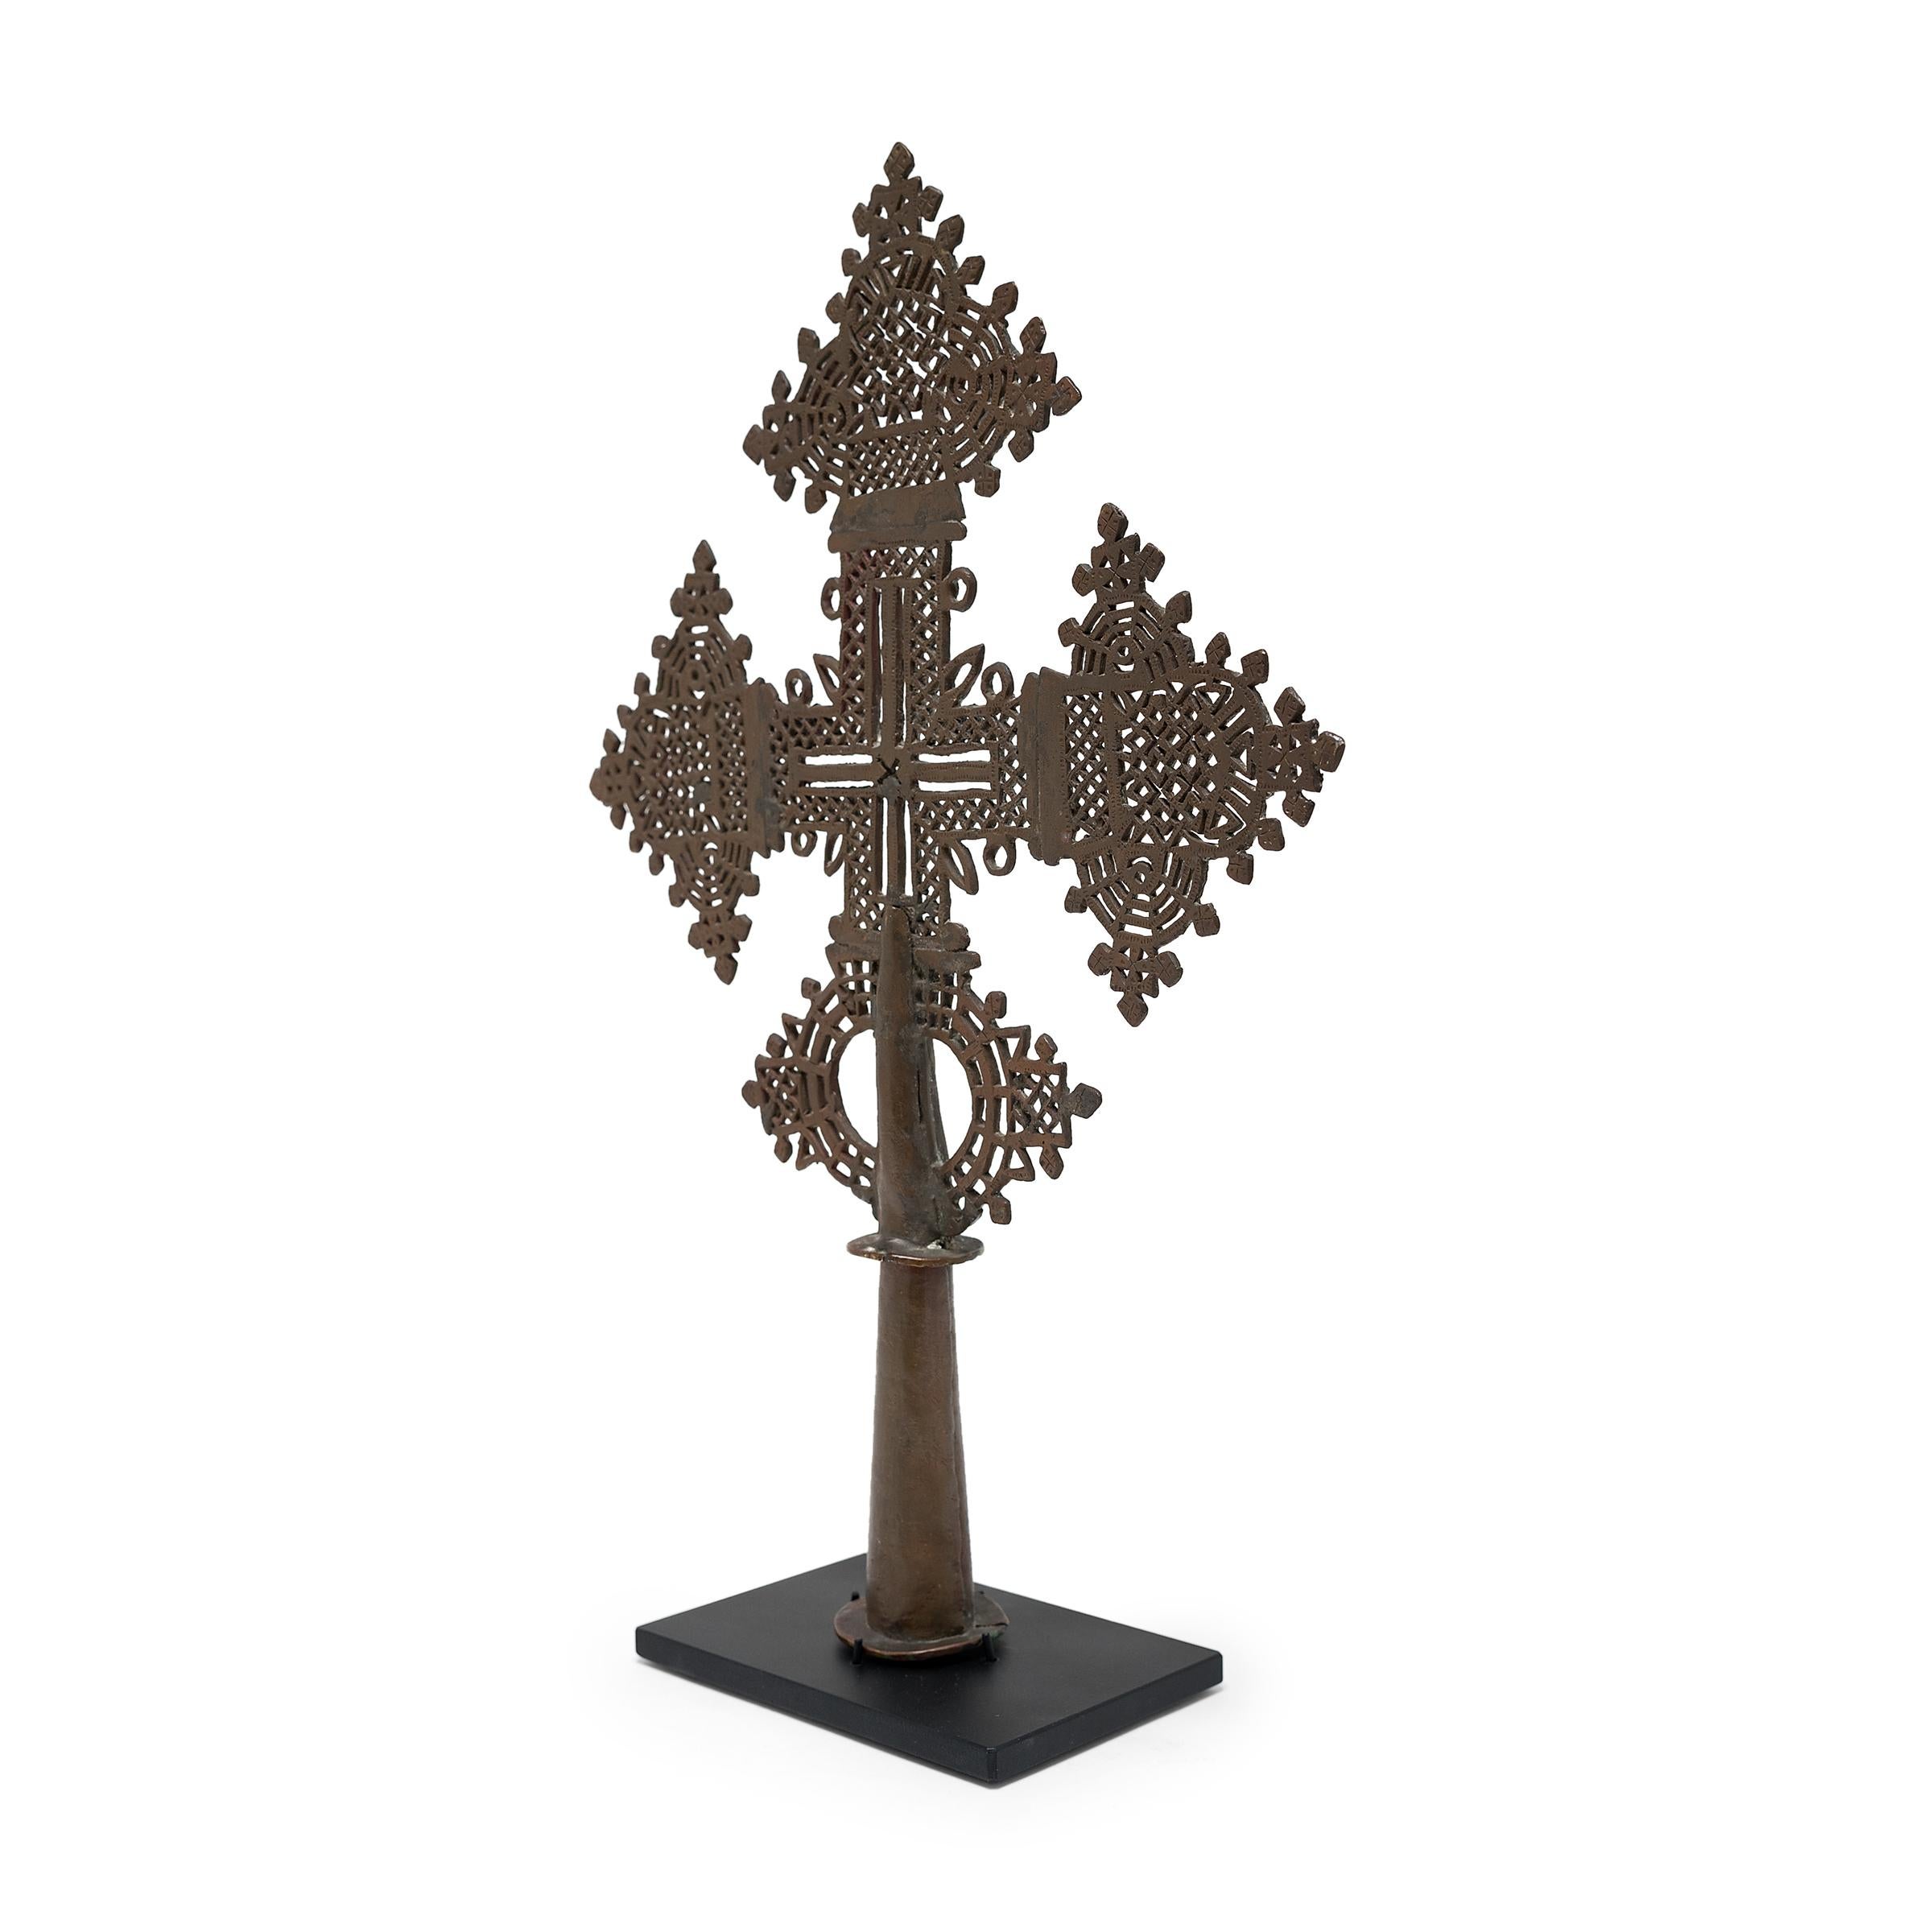 This intricate Ethiopian processional cross exemplifies a style unique to the region's Coptic subset of the Christian faith. The exquisitely detailed perforated form is centred on a hollowed base that could be either fitted upon a staff for